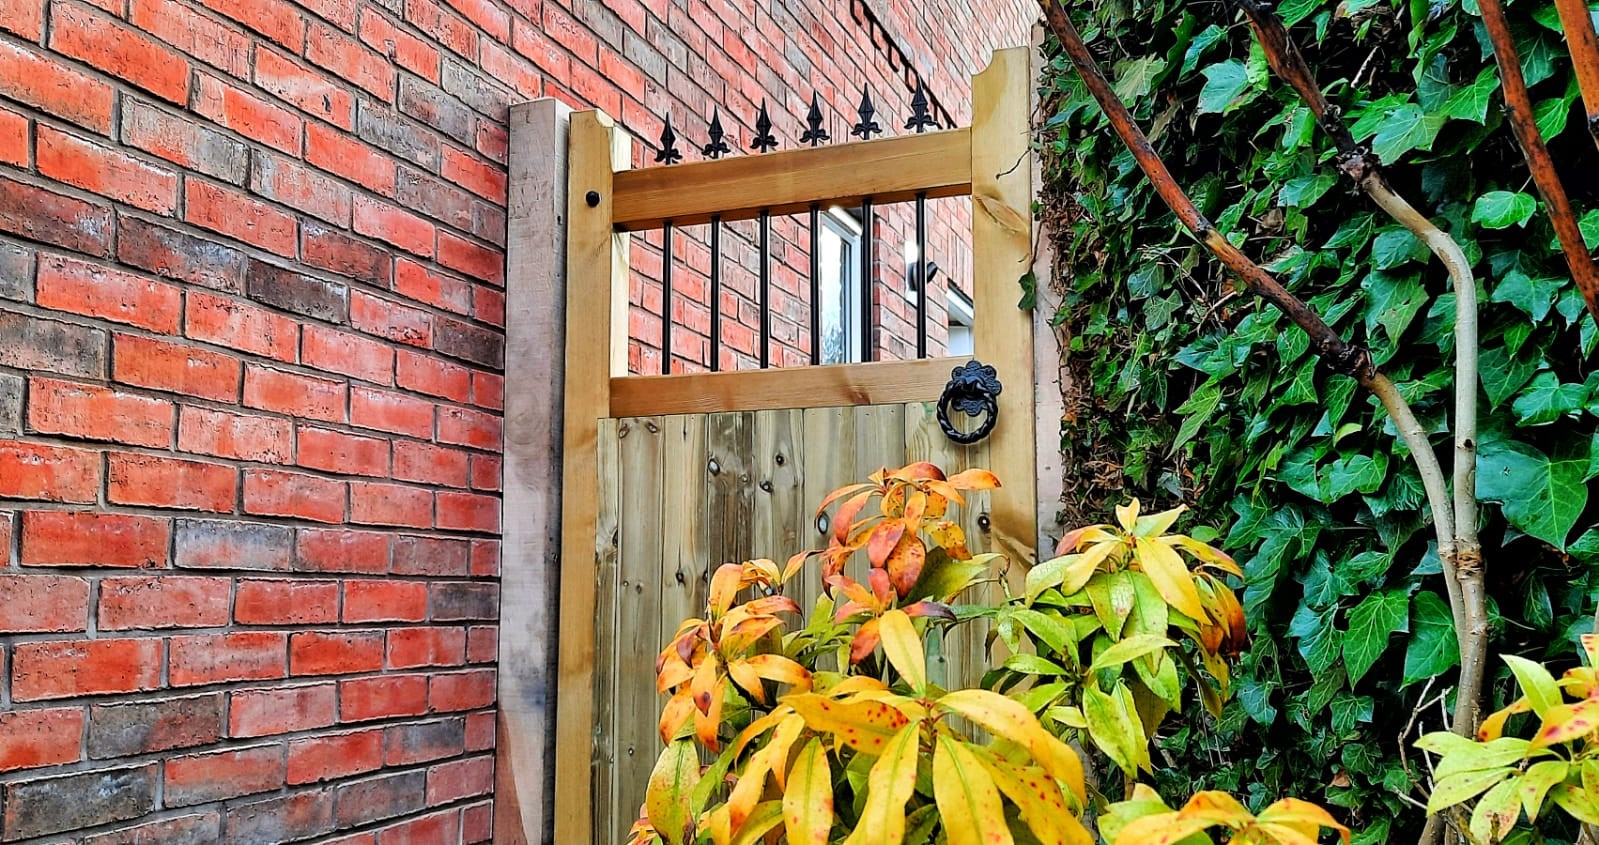 wooden side gate with metal infill bars and finials